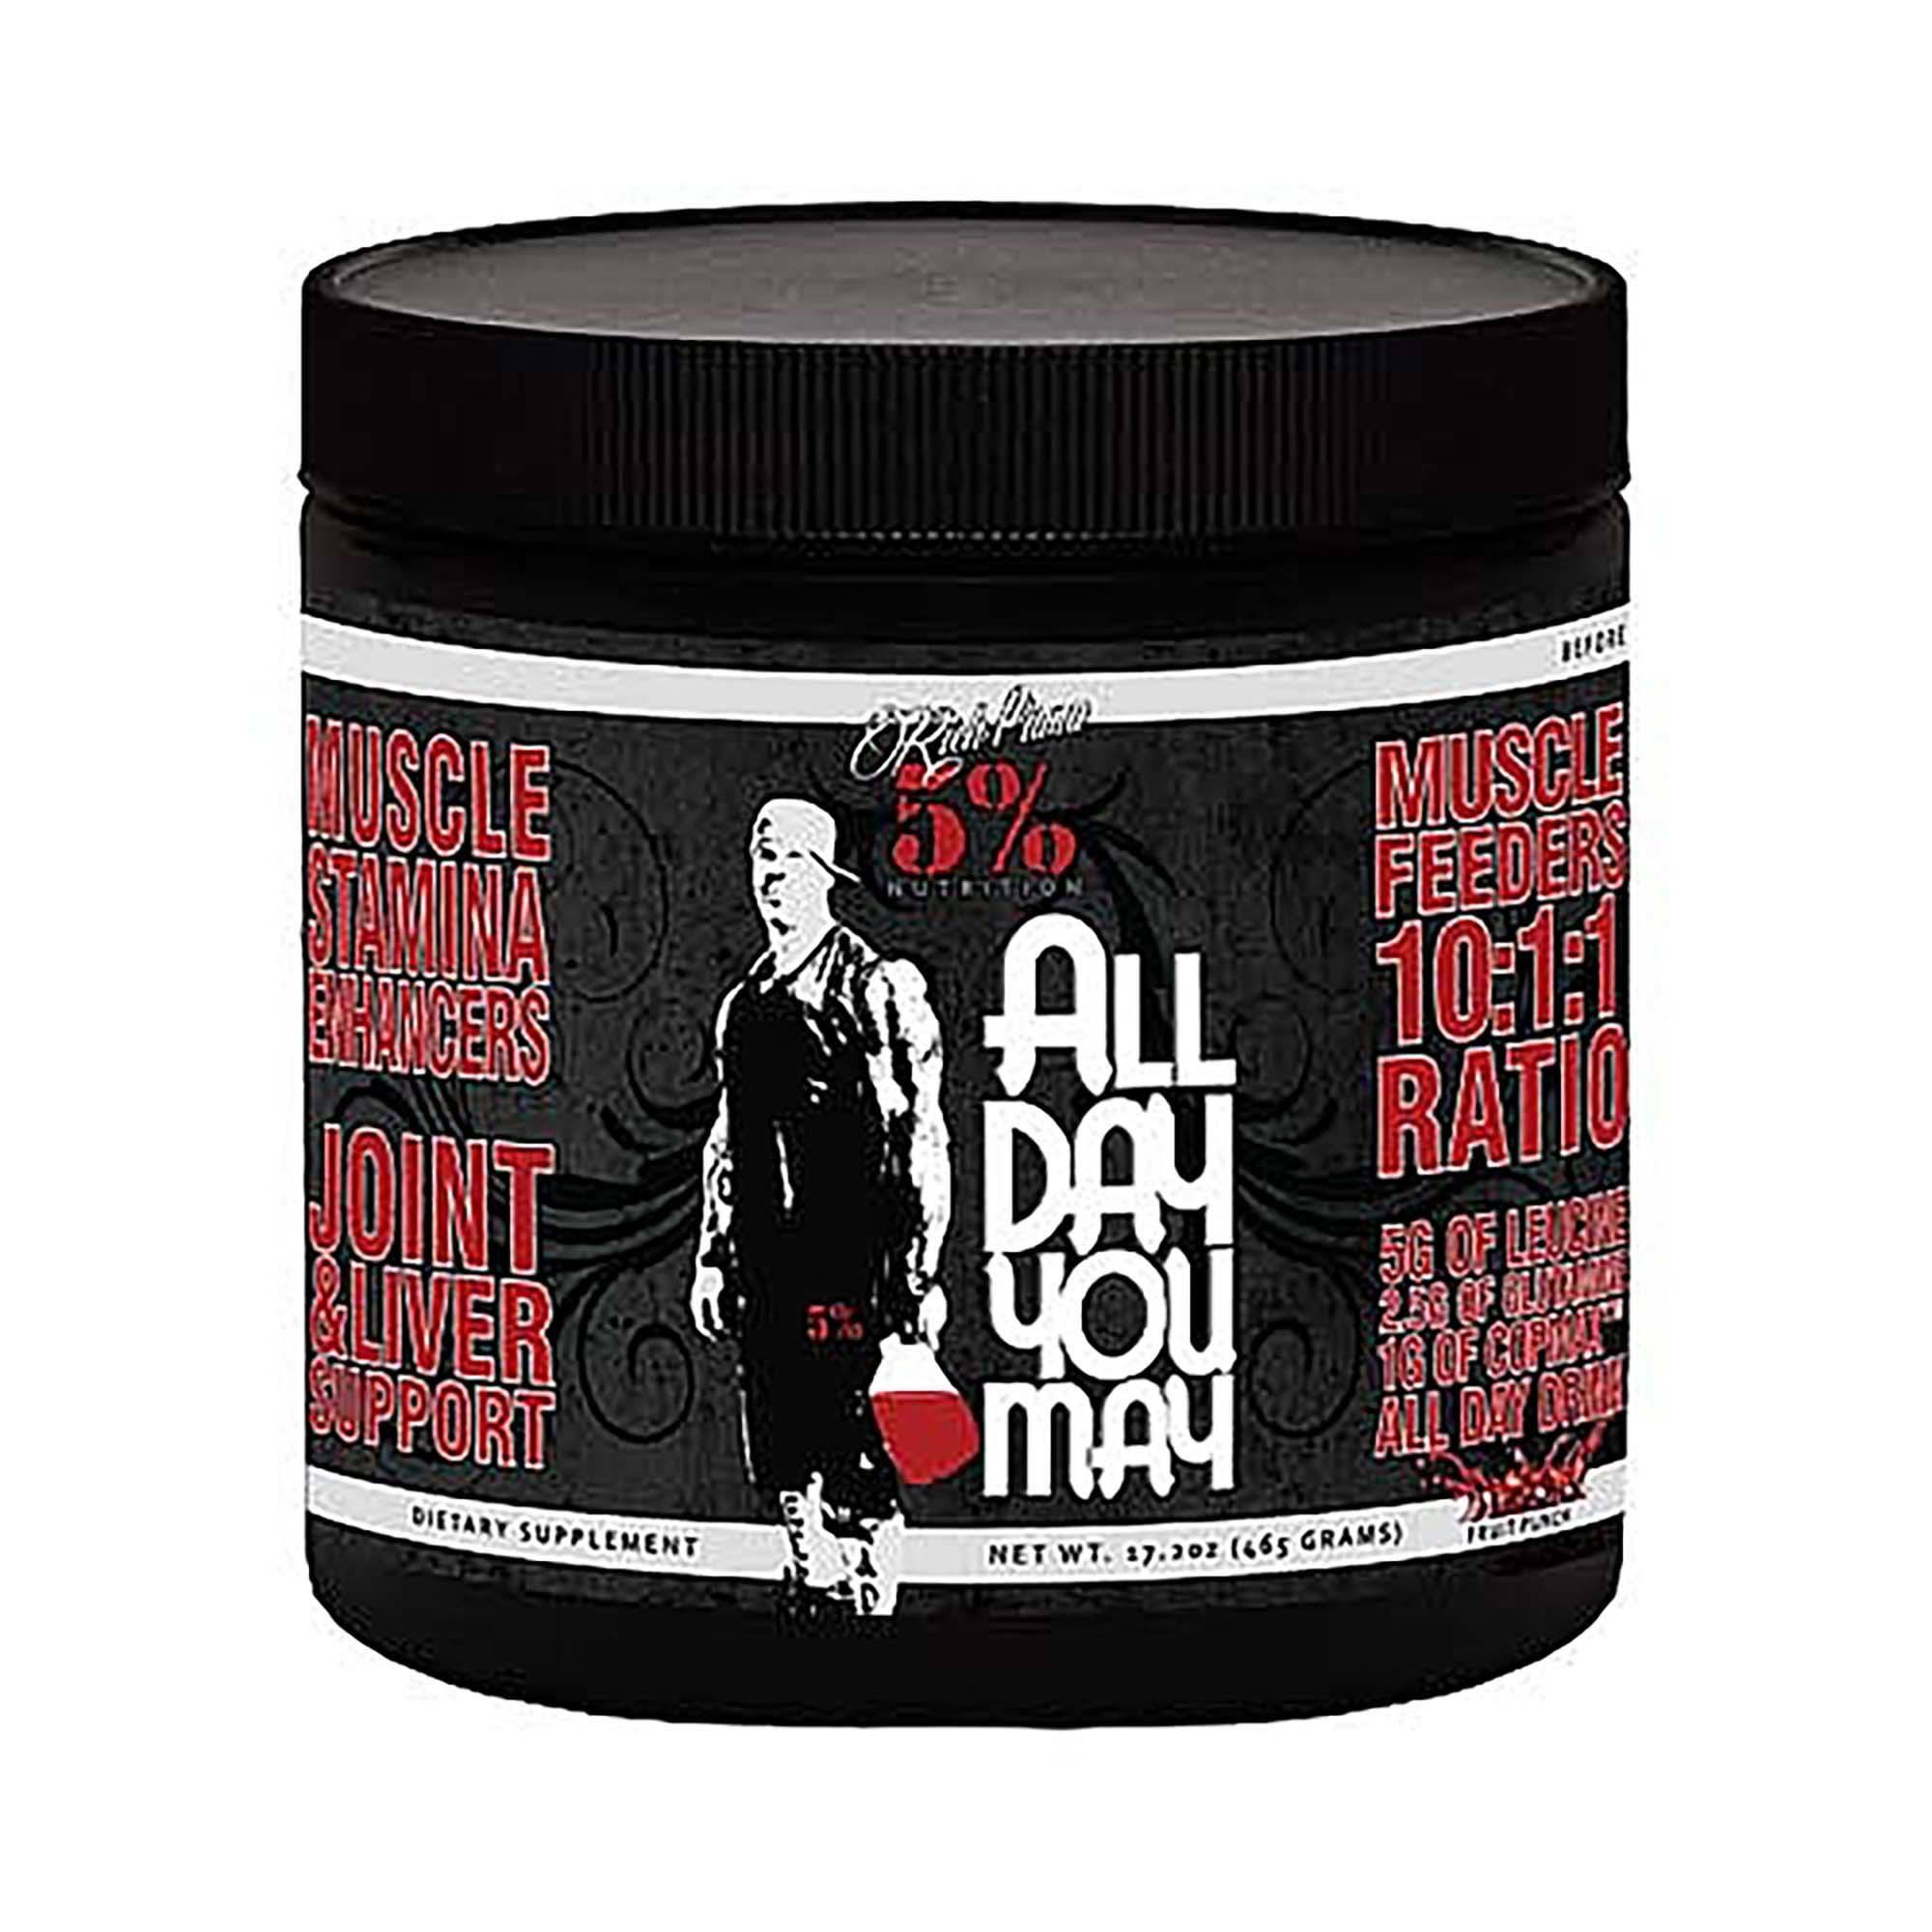 5% Nutrition All Day You May Dietary Supplement - Watermelon, 465g